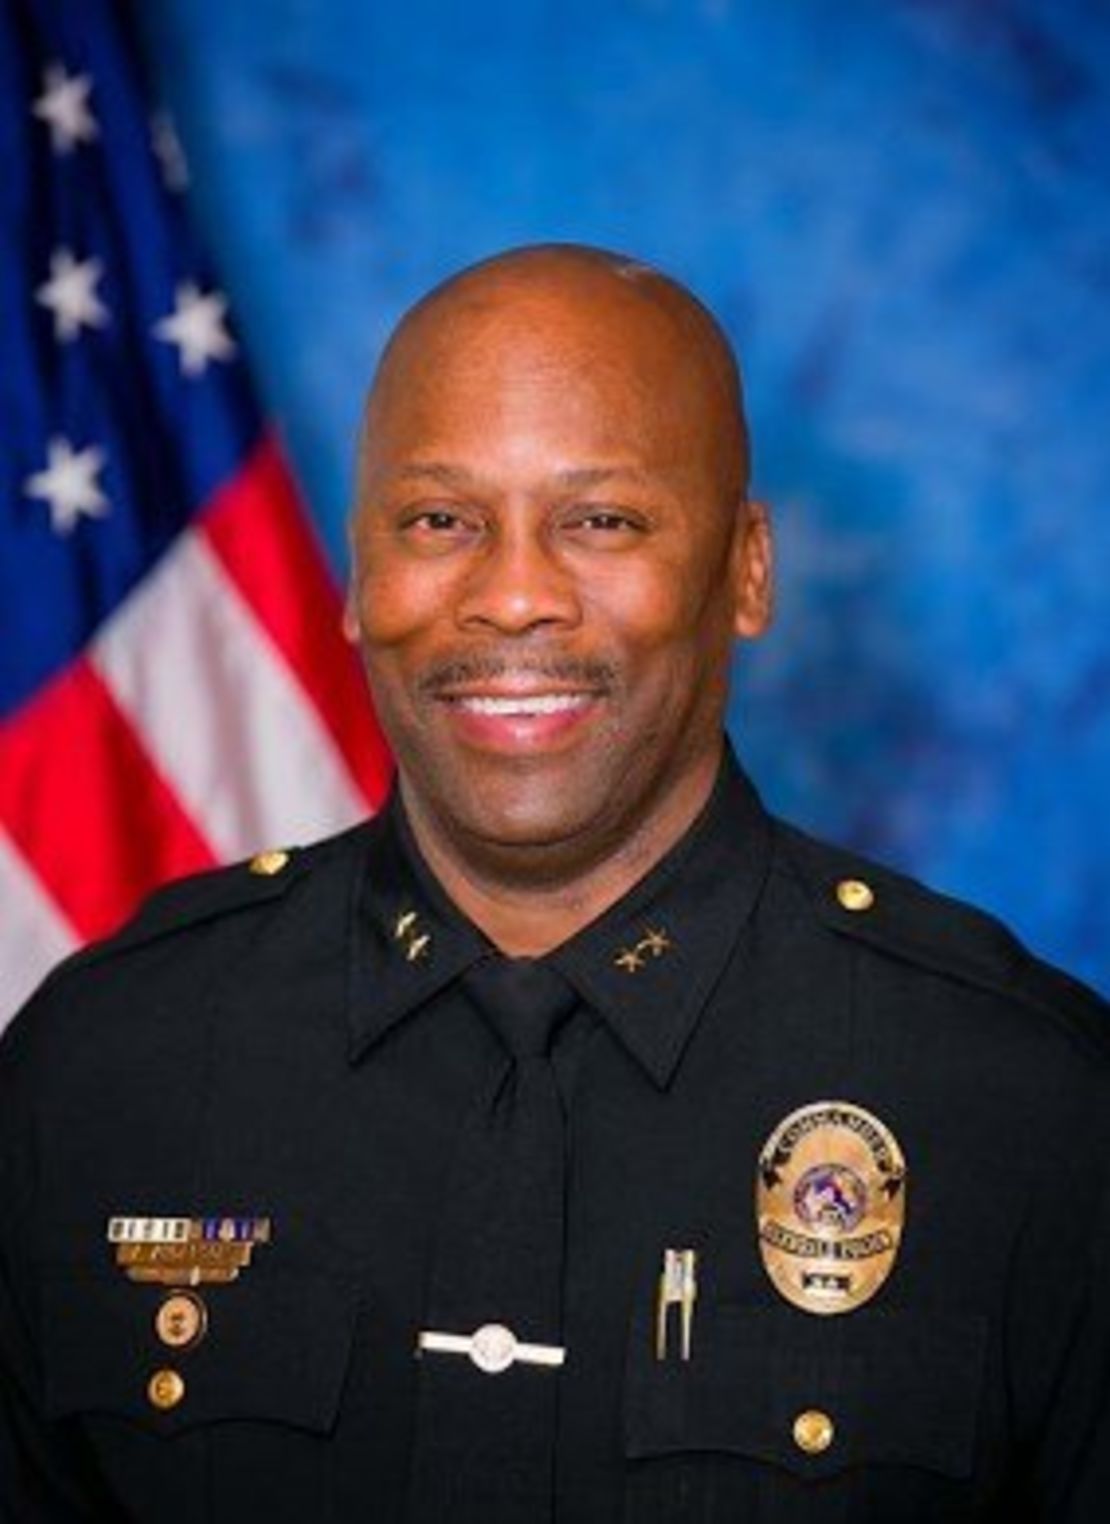 Andre Anderson asked for the community's help as he leads the police force in Ferguson, Missouri.